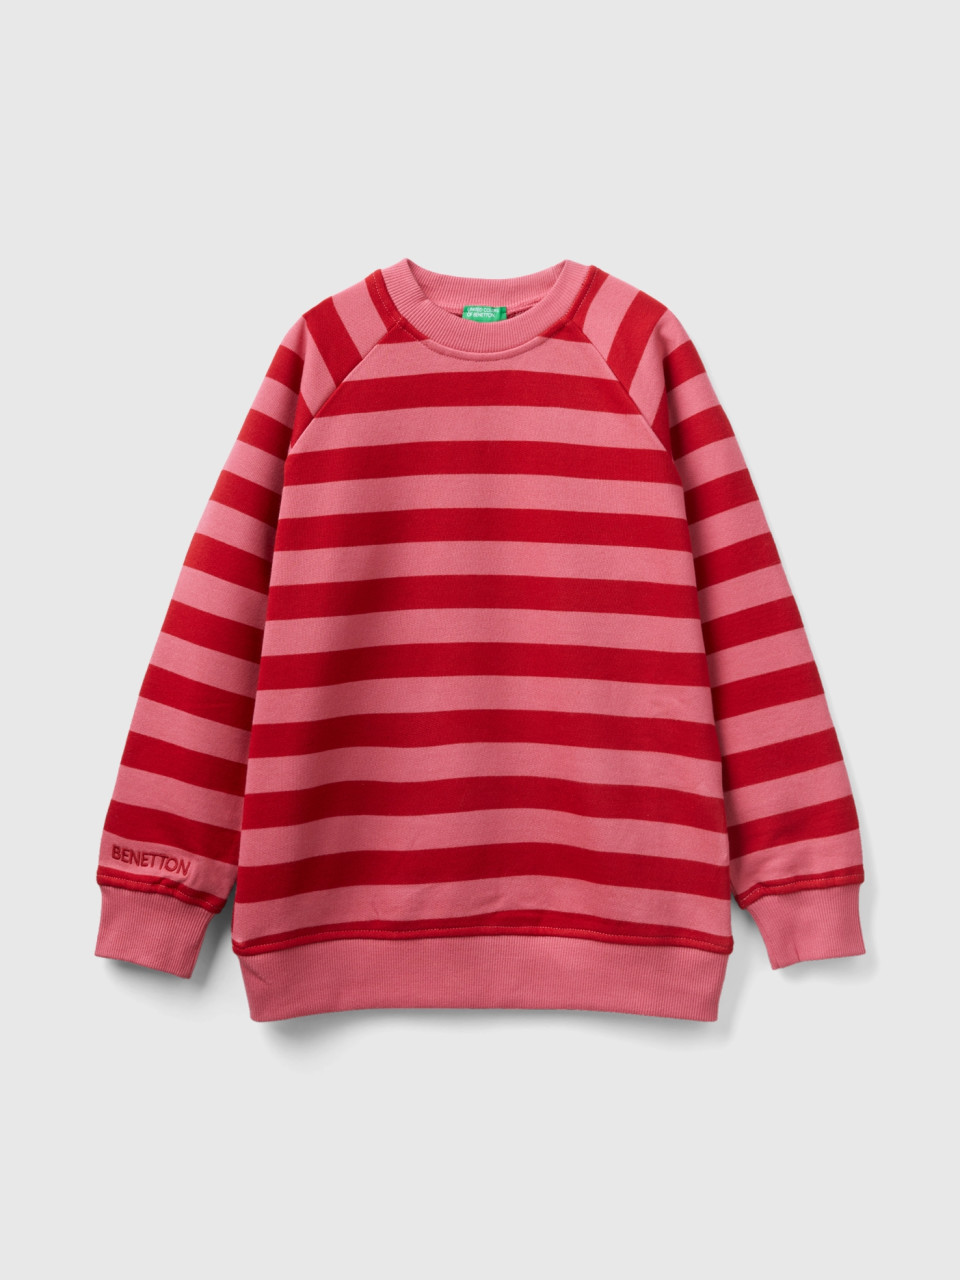 Benetton, Pink And Red Striped Sweatshirt, Multi-color, Kids